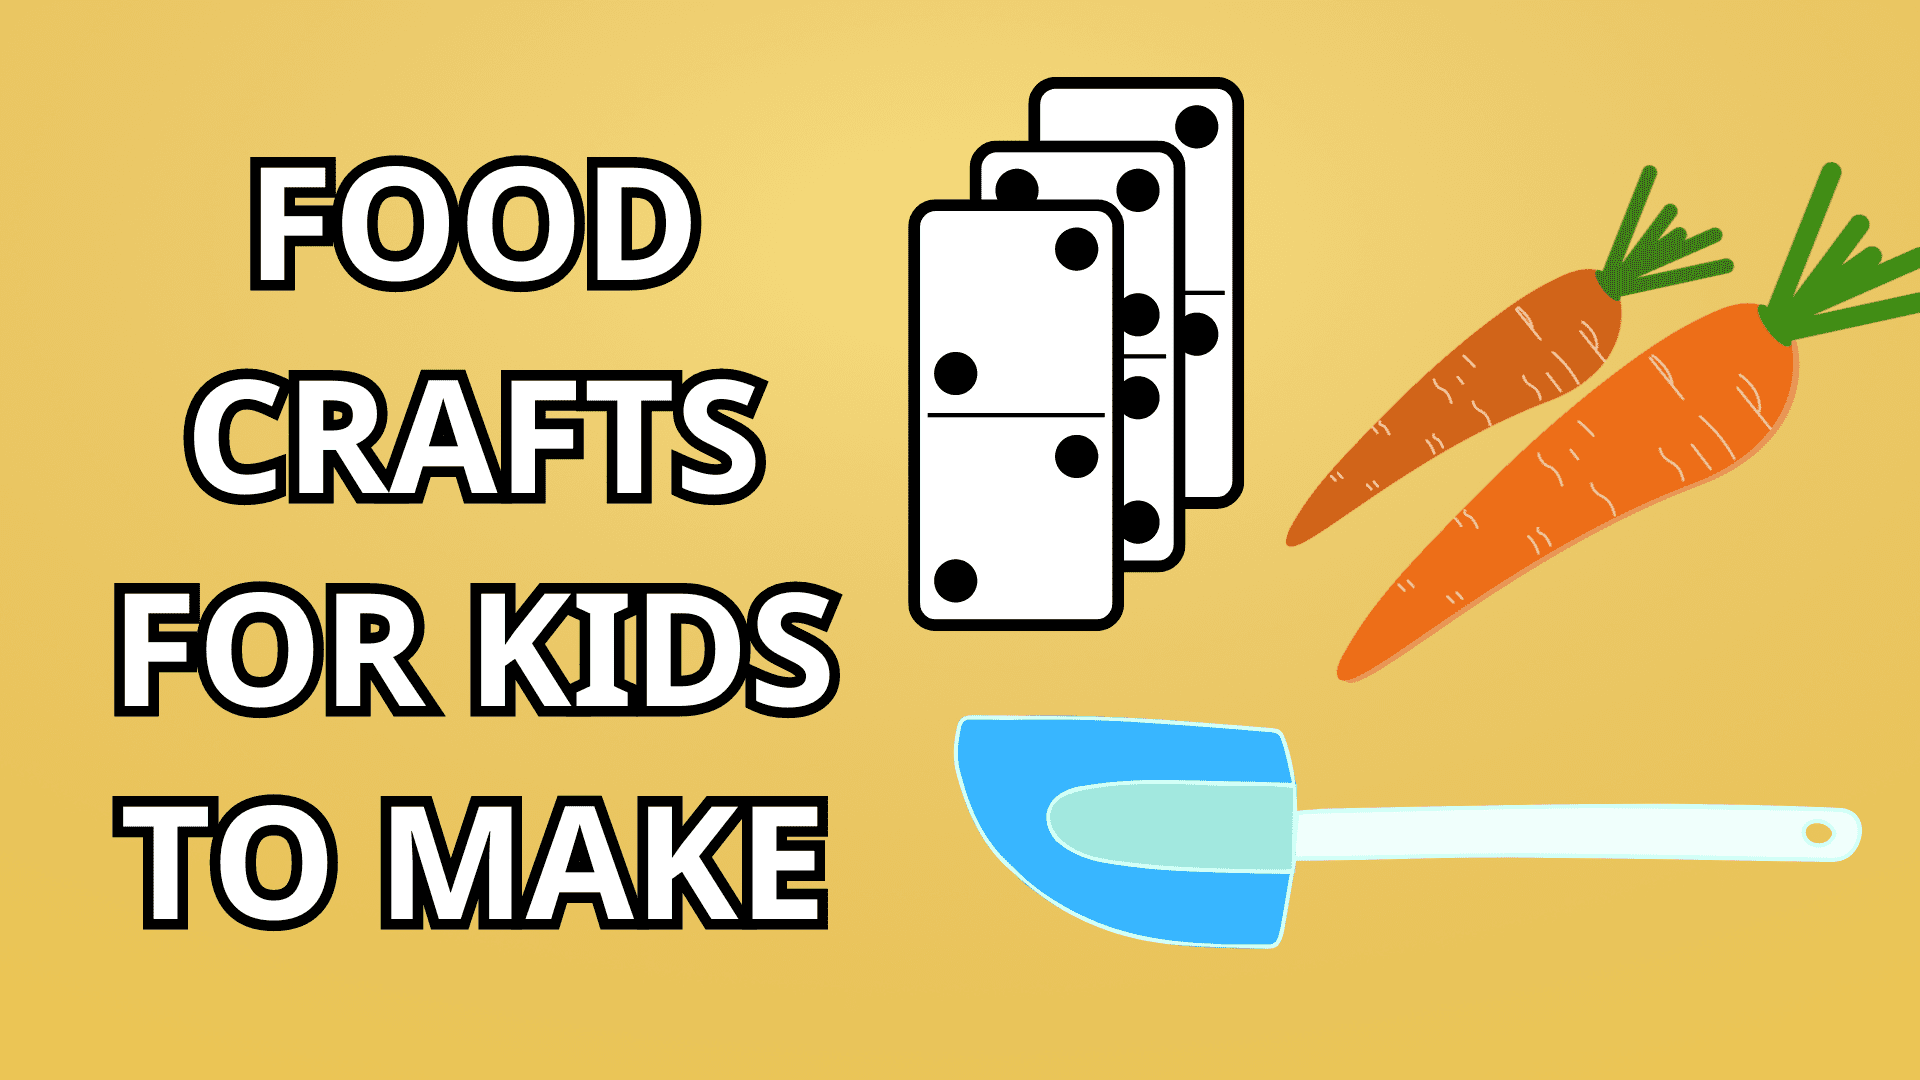 A stack of dominos, two orange carrots, and a blue silicone spatula. The text "Food Crafts for Kids to Make" against a yellow background.